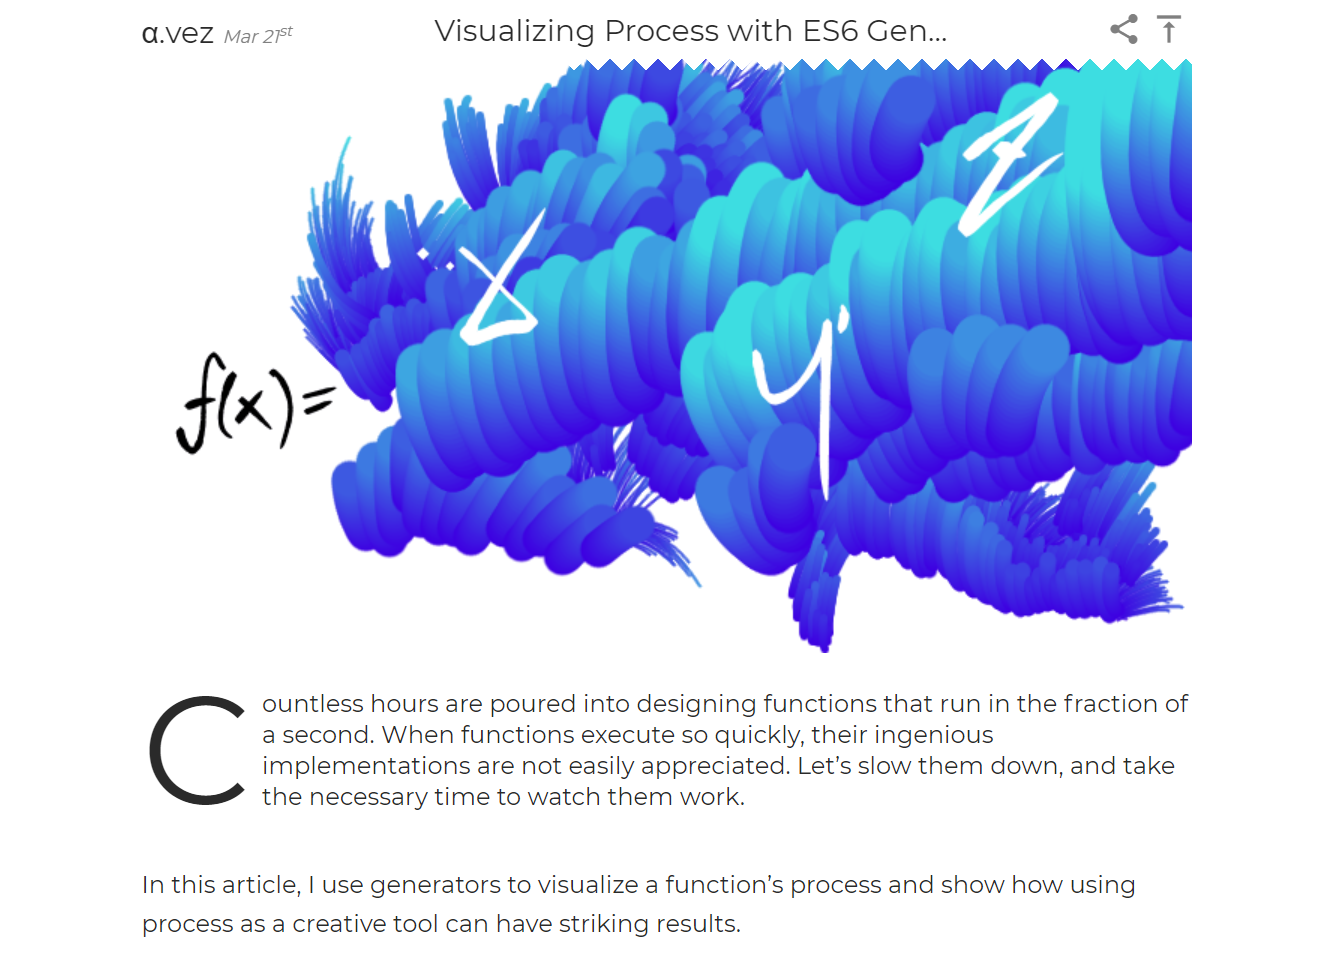 A screenshot of Visualizing Process With ES6 Generators article